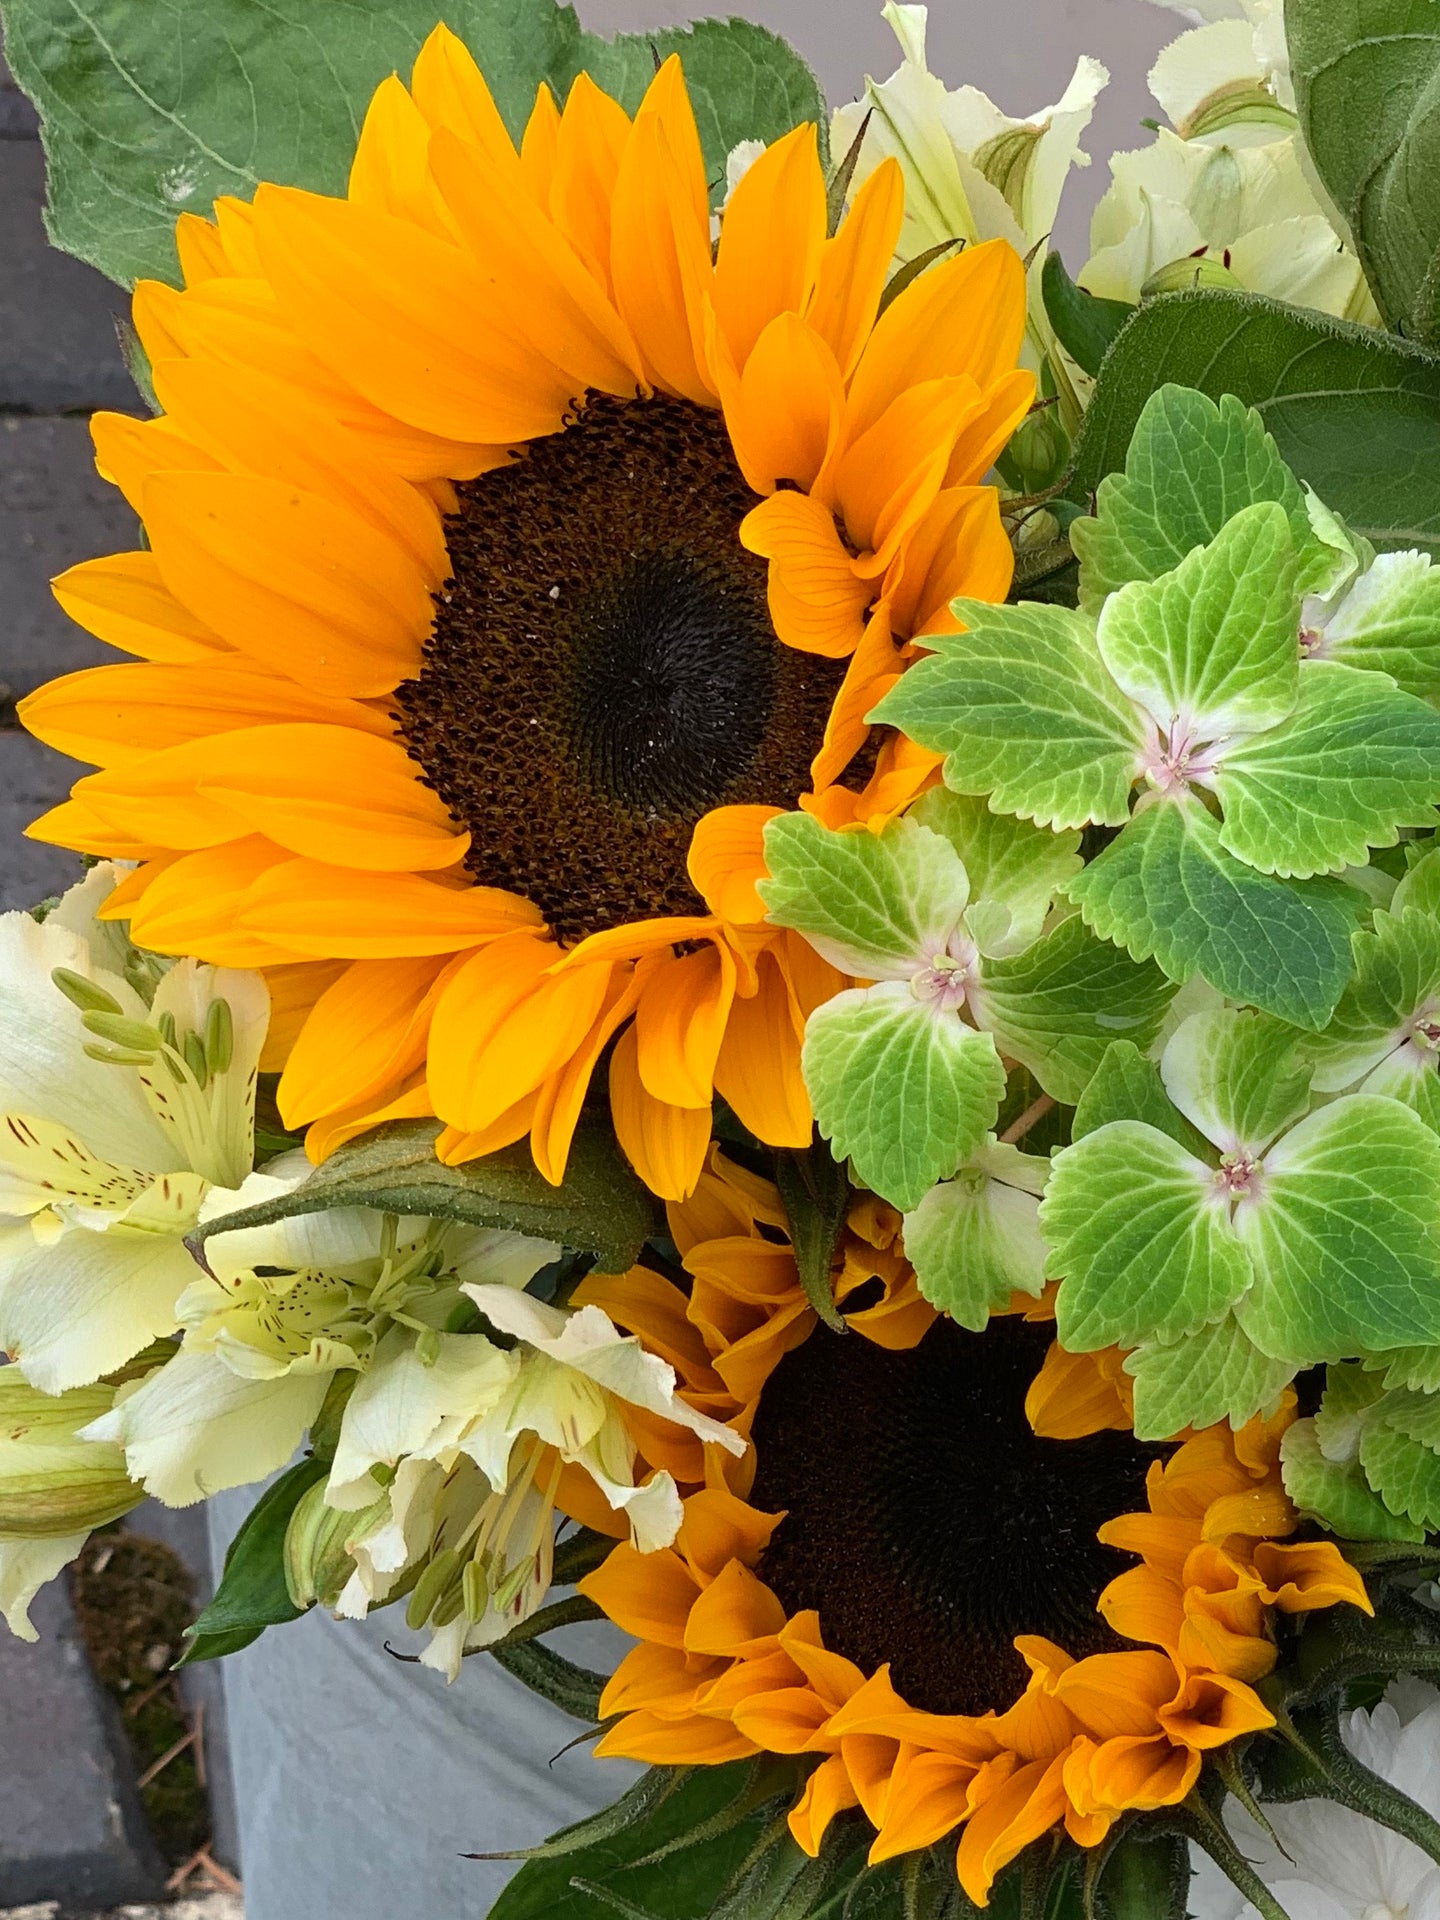 10/07/20 Ercolano LA lily and sunflower Bouquet 100% British grown blooms